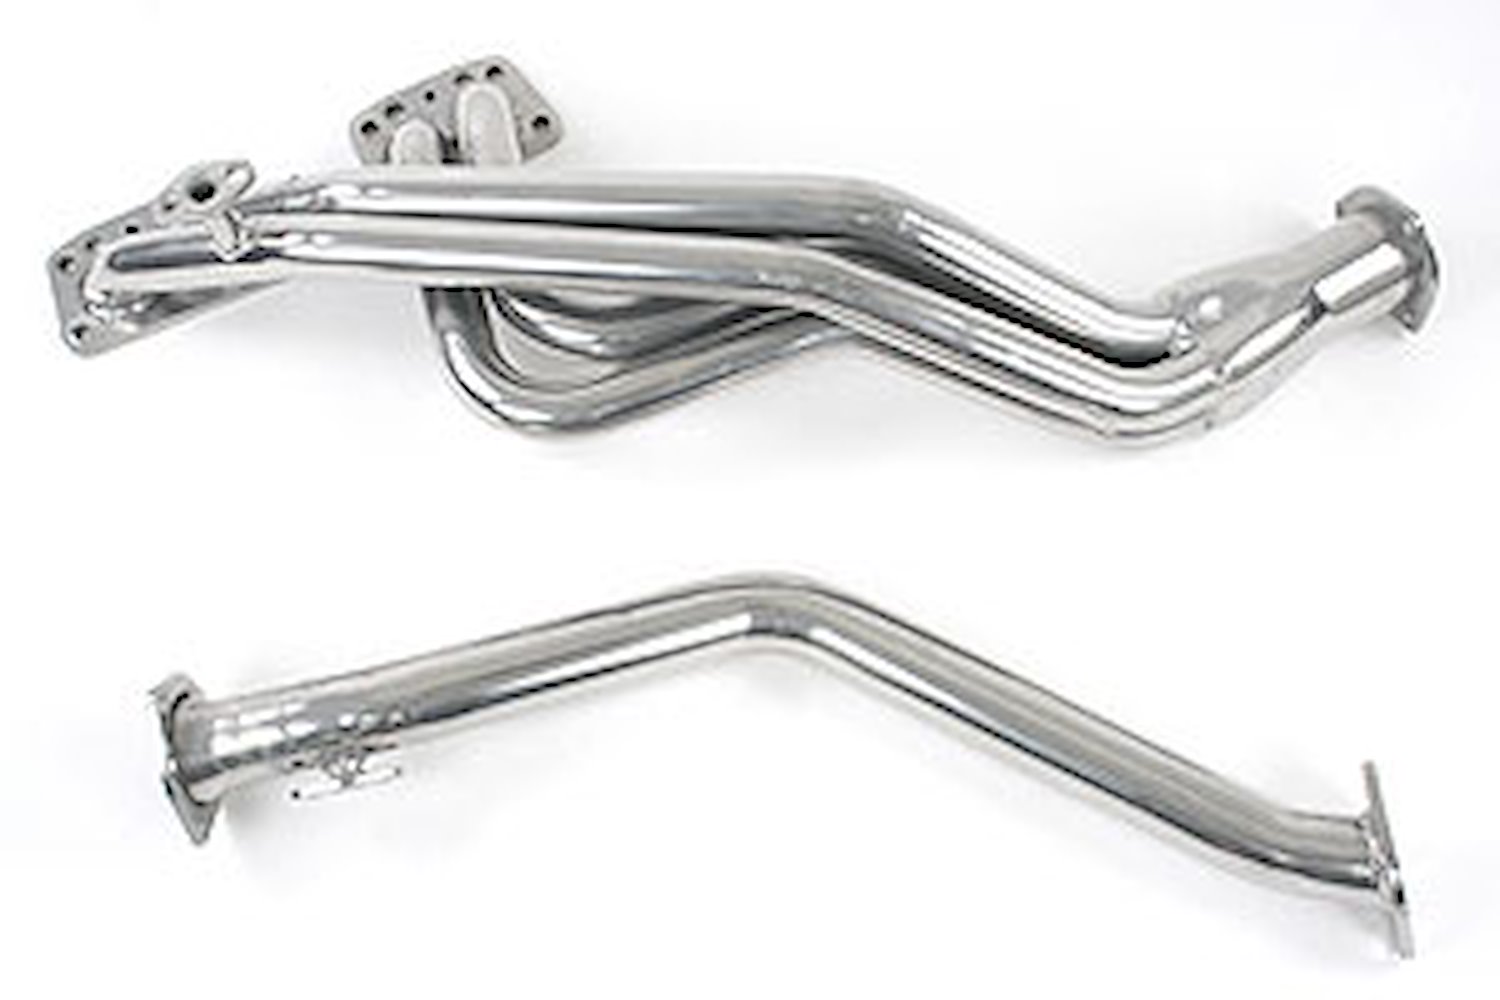 Armor Coat Truck Header 1984-89 Pickup 2WD/4WD and 4Runner 2.2L/2.4L 4-speed or auto